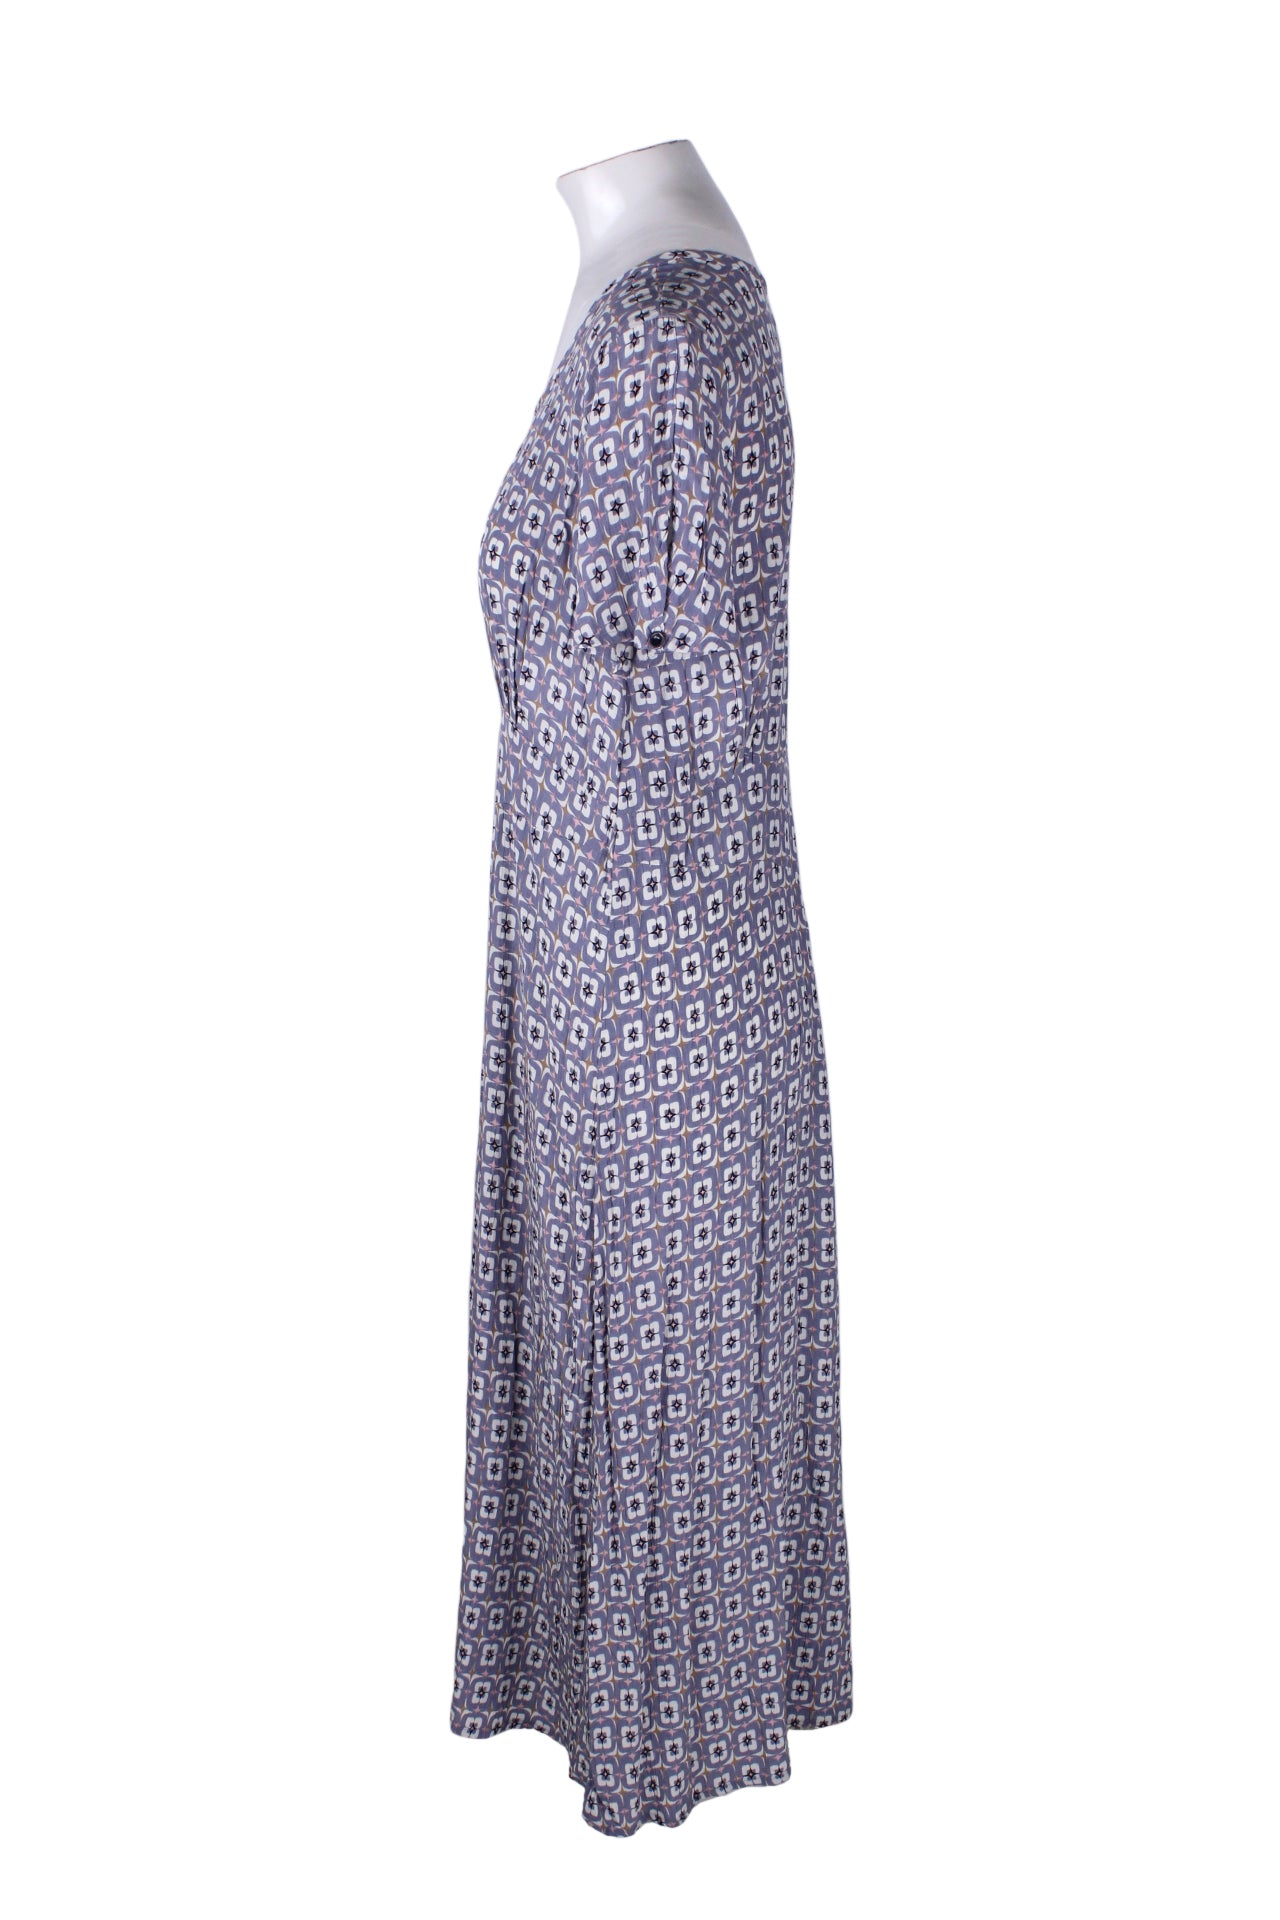 side view of flax light purple maxi dress. features rounded neckline, pink sparkle with repeating lilac and white print throughout, crinkled silk texture lasticized waist, and pull on style. 